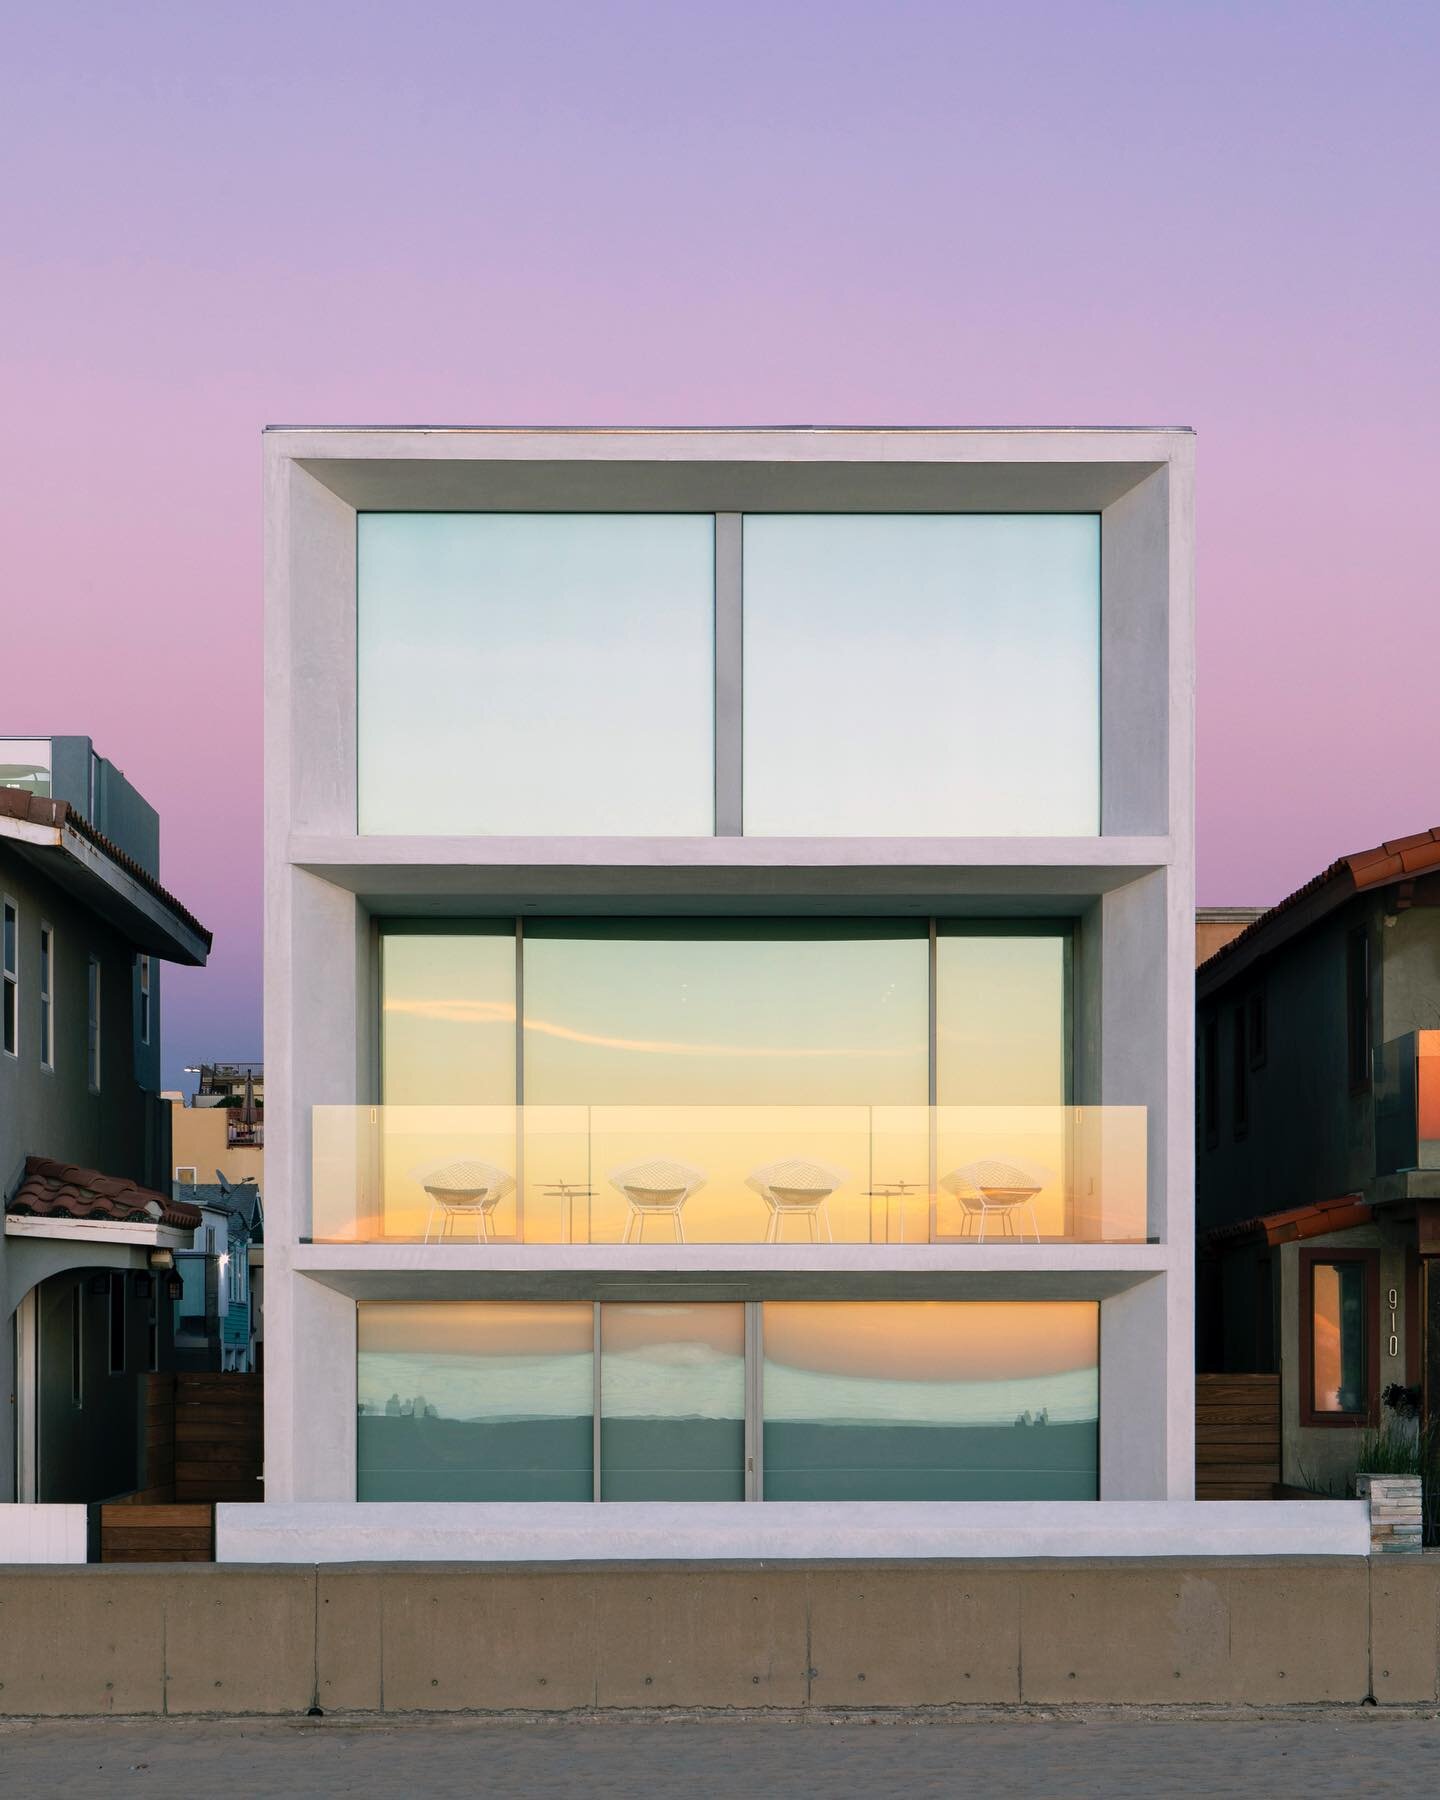 Day to night Timelapse of Strand House at Hermosa Beach. - Los Angeles, CA. [2/3] 

Architecture Design -  XTEN Architecture 
Photography - Art Gray 

#architecture #architecturephotography #archilovers #archi #modern #modernart #losangeles #hermosab